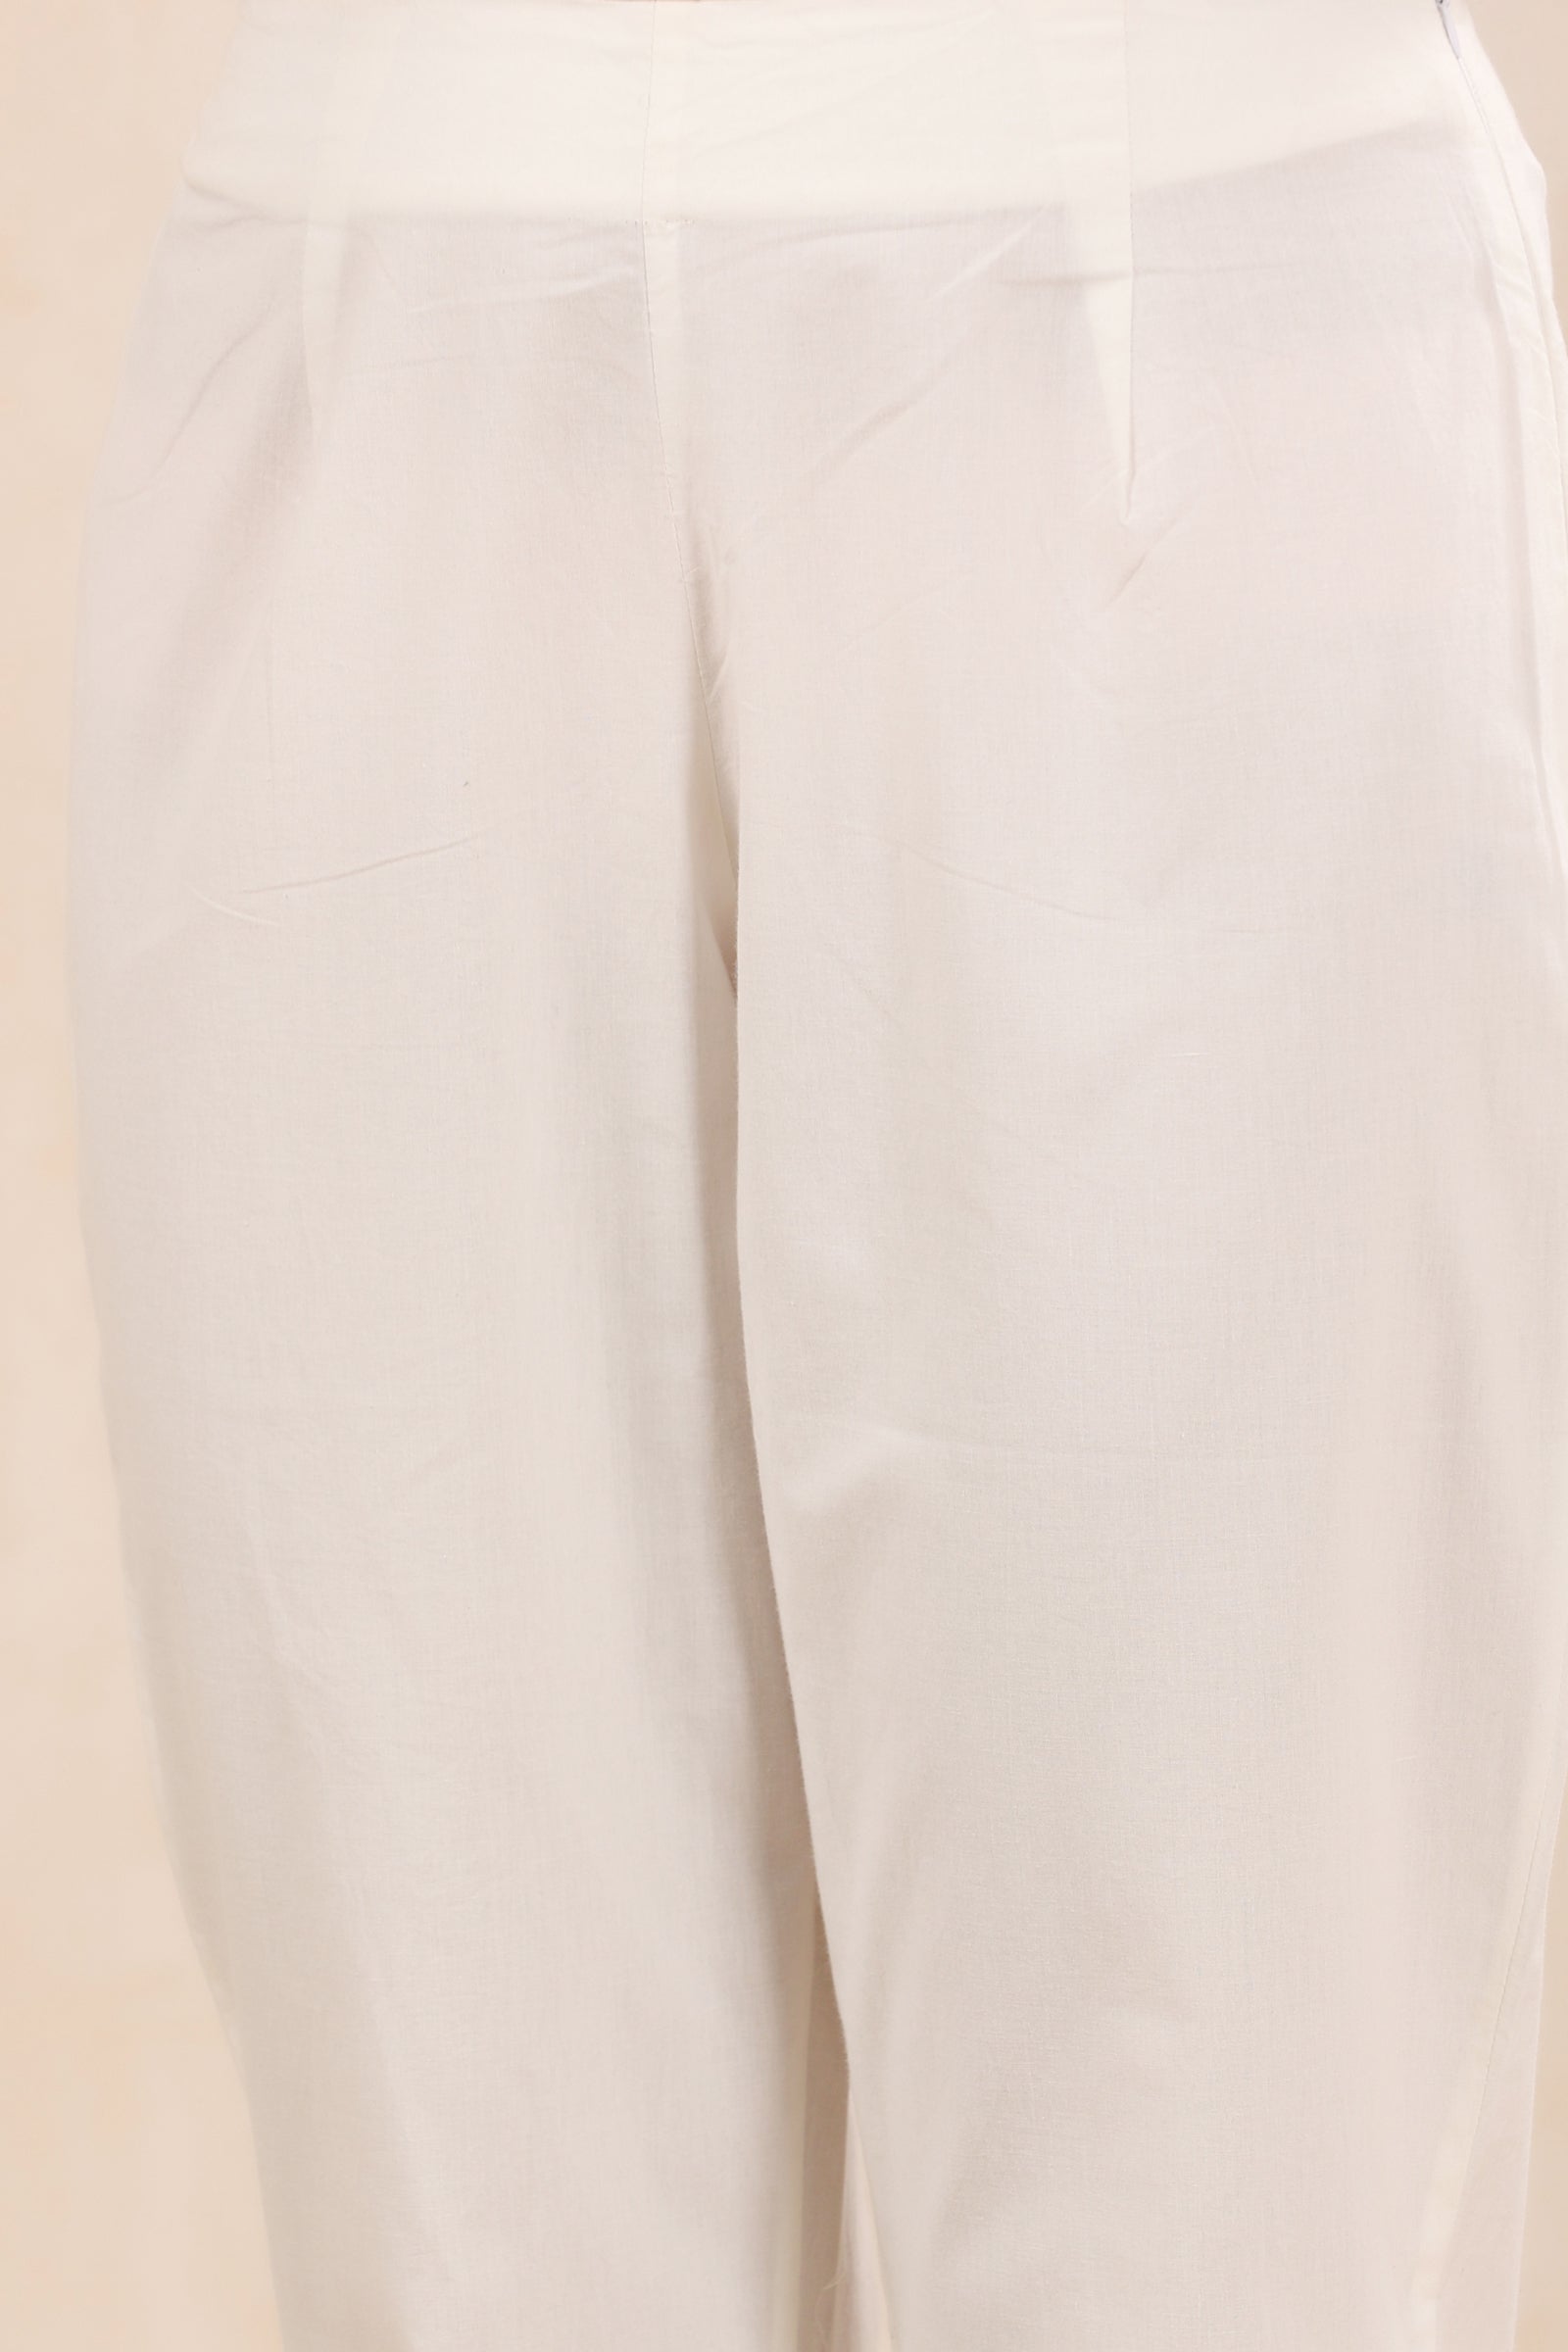 Mehrab Solid White Relaxed Fit Cotton Pants - shahenazindia